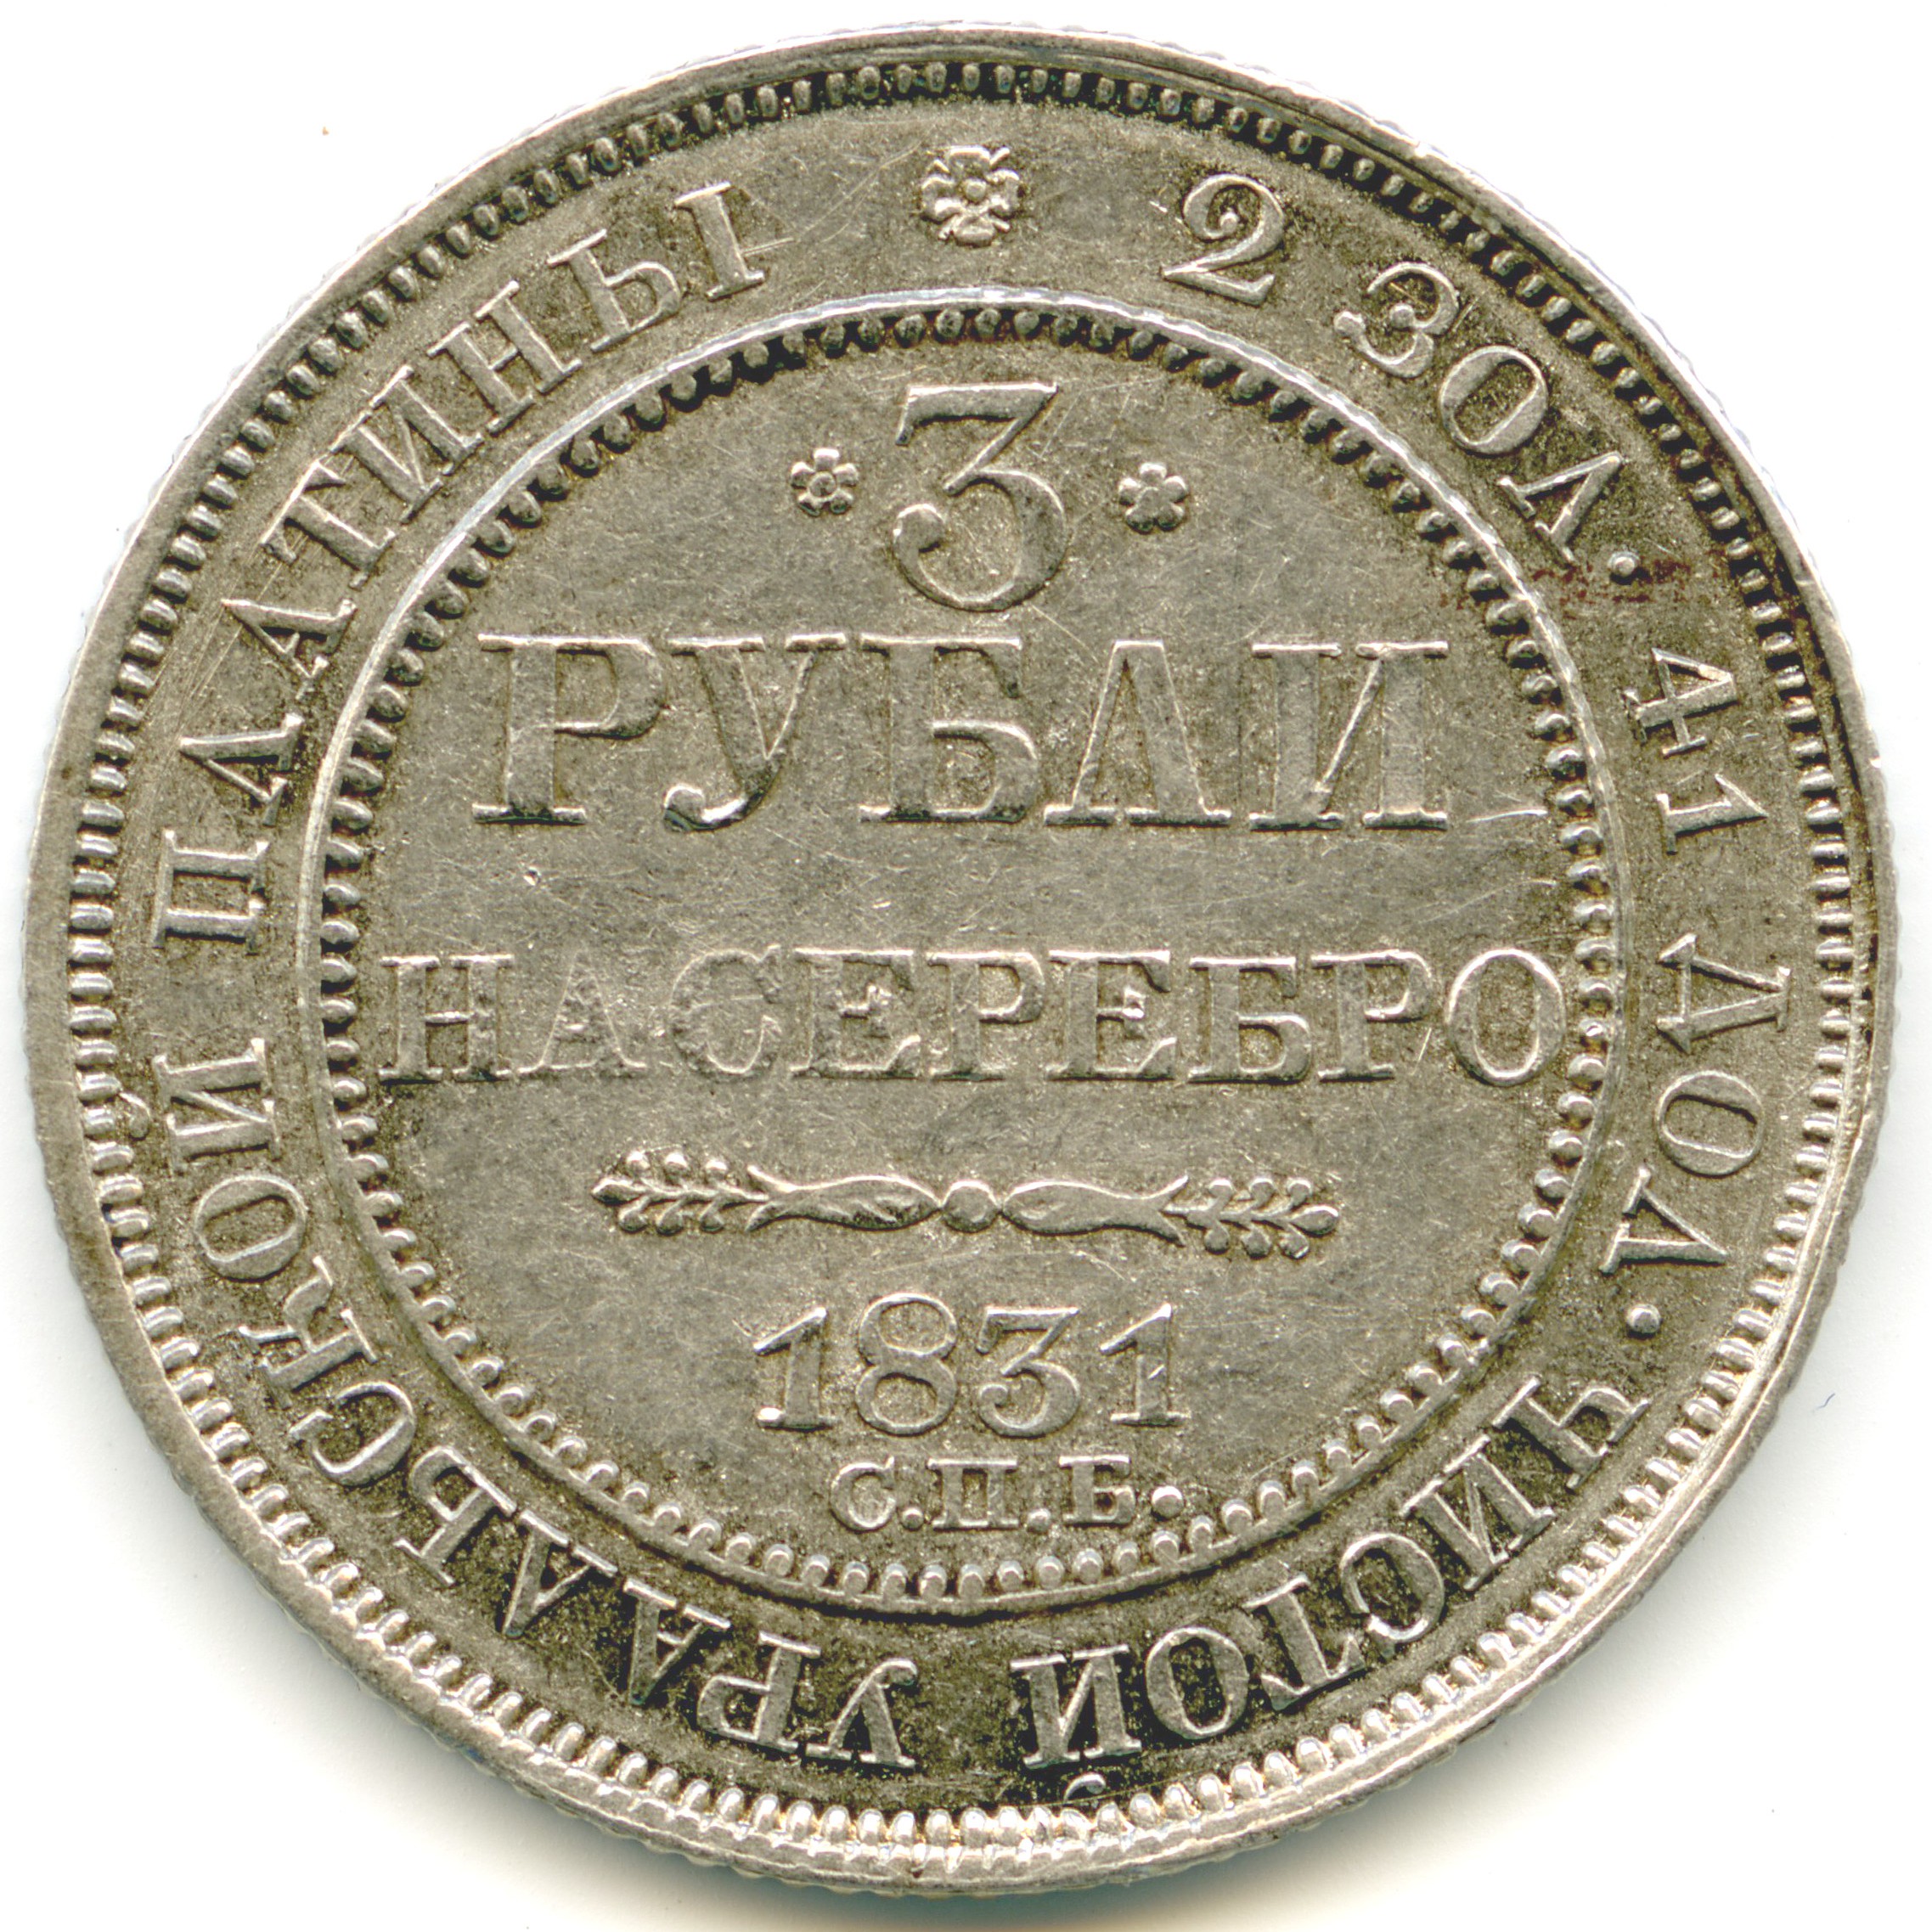 Russie - 3 Roubles - 1831 avers